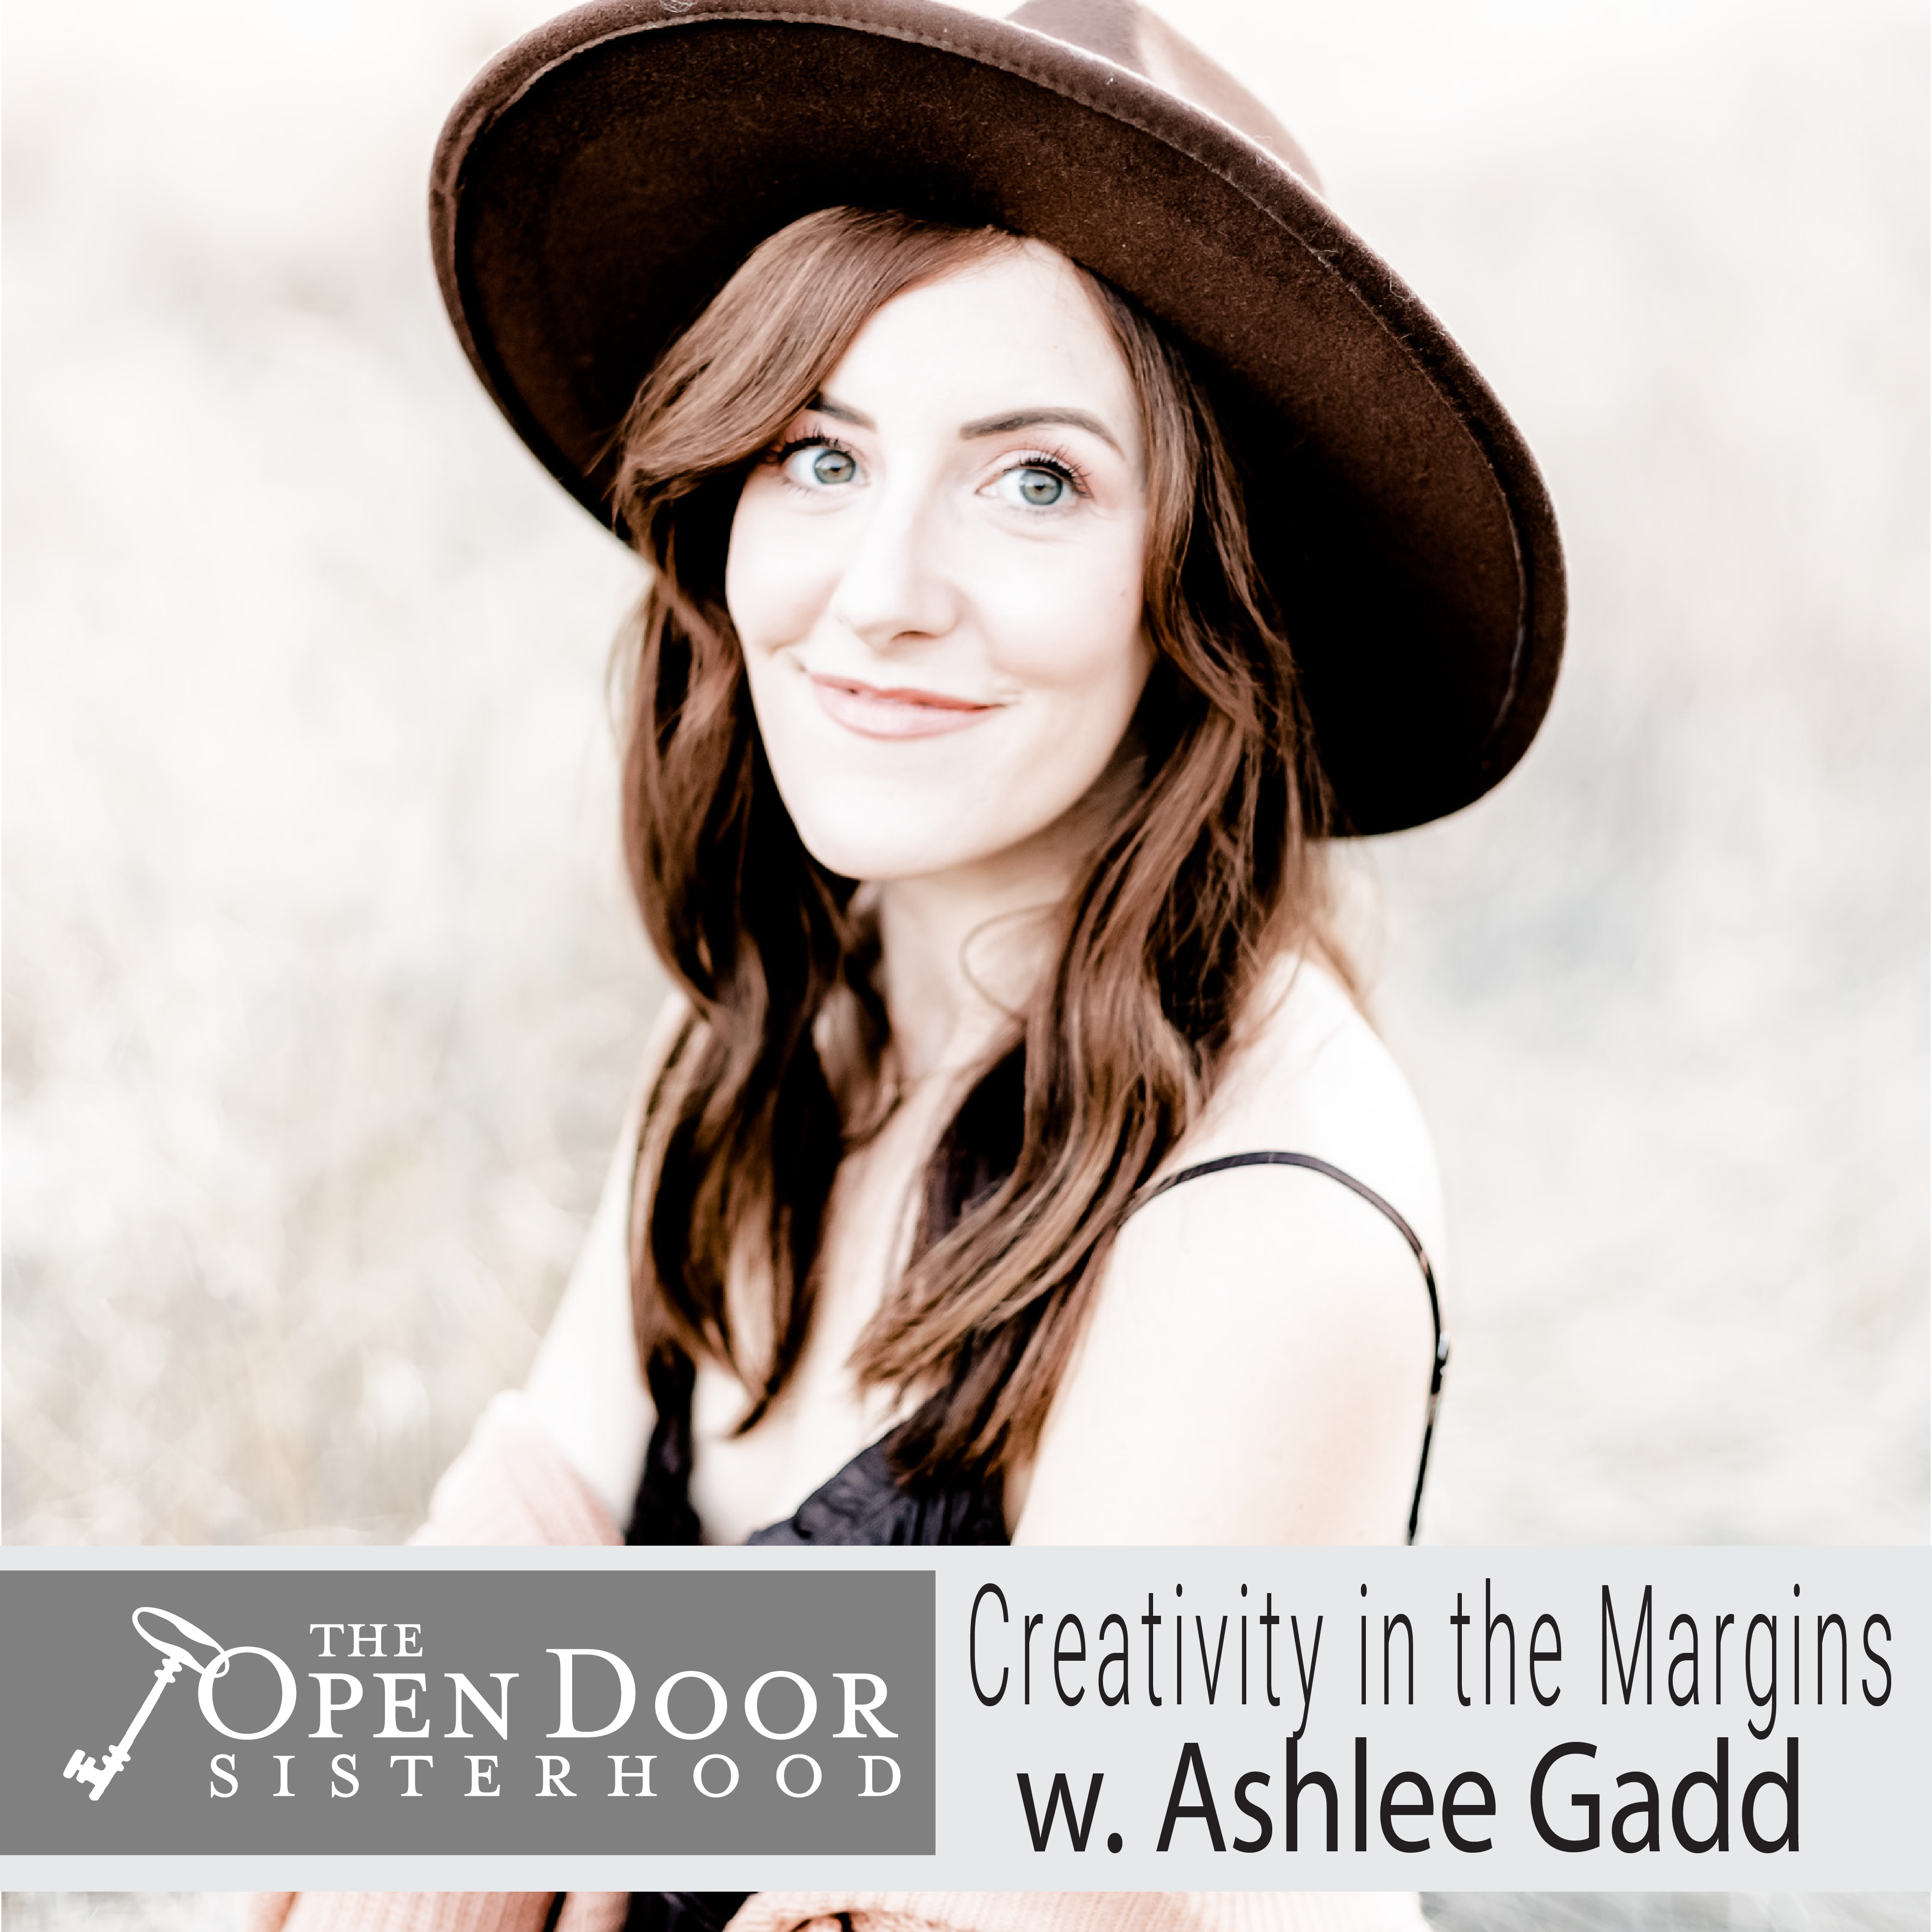 Gifts For The Hard To Buy For with Krista Gilbert & Alex Kuykendall - The  Open Door Sisterhood